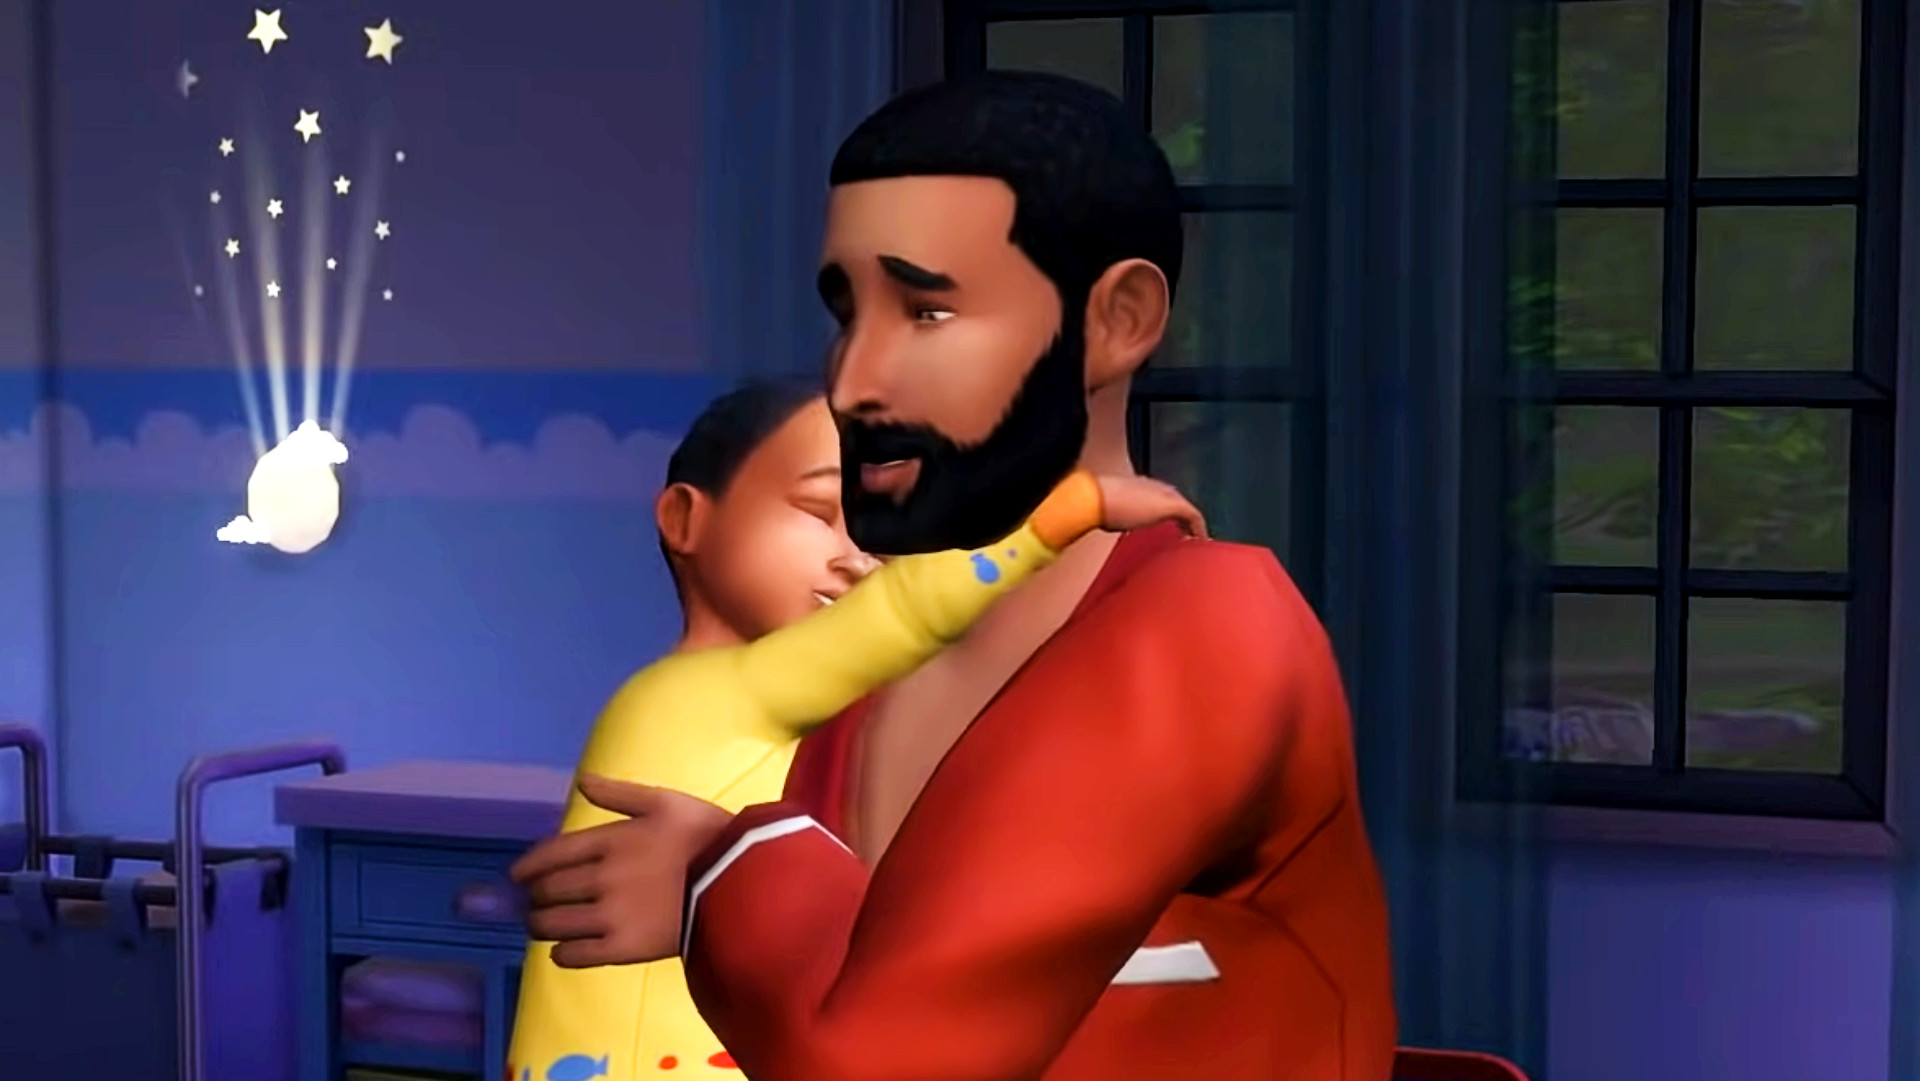 The Sims 4 babies lack the personality EA nailed in Sims 2, say fans